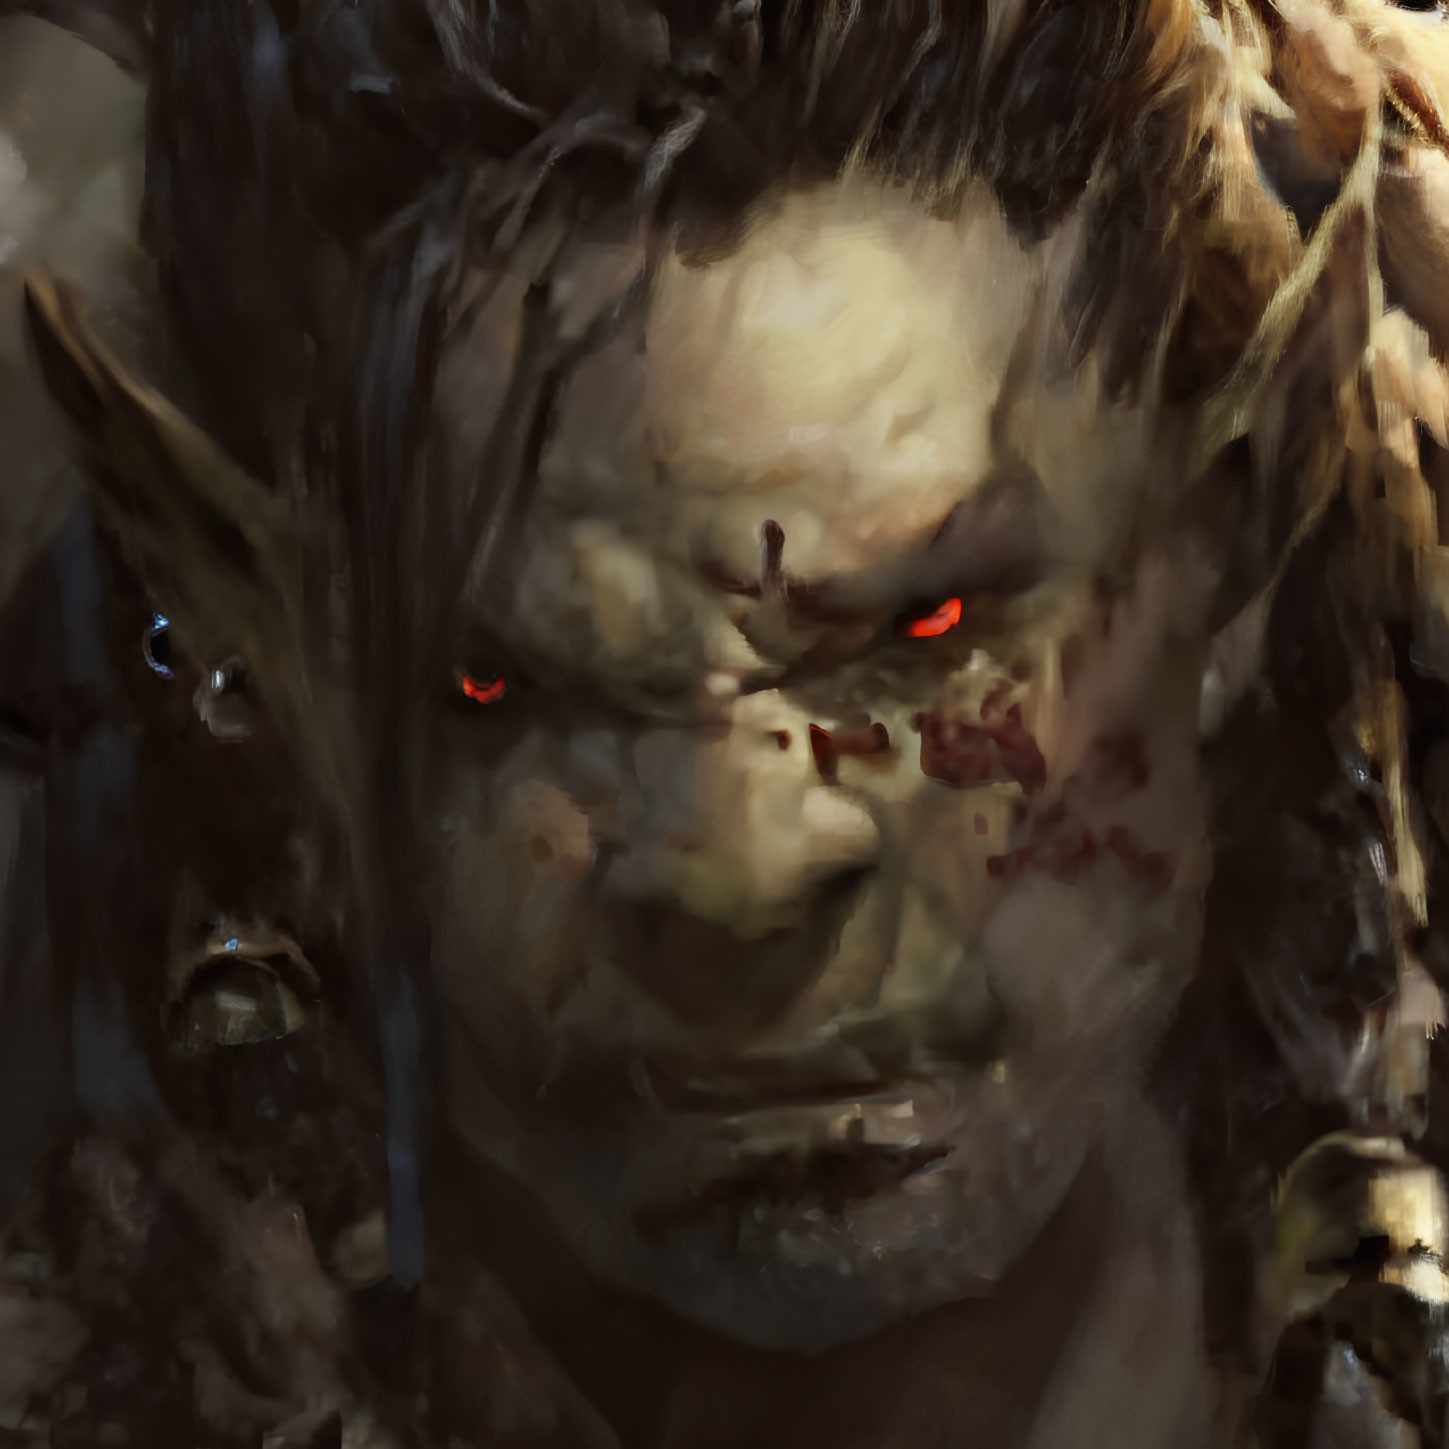 Fantasy character with pointed ears, red eyes, and mottled skin in shadows